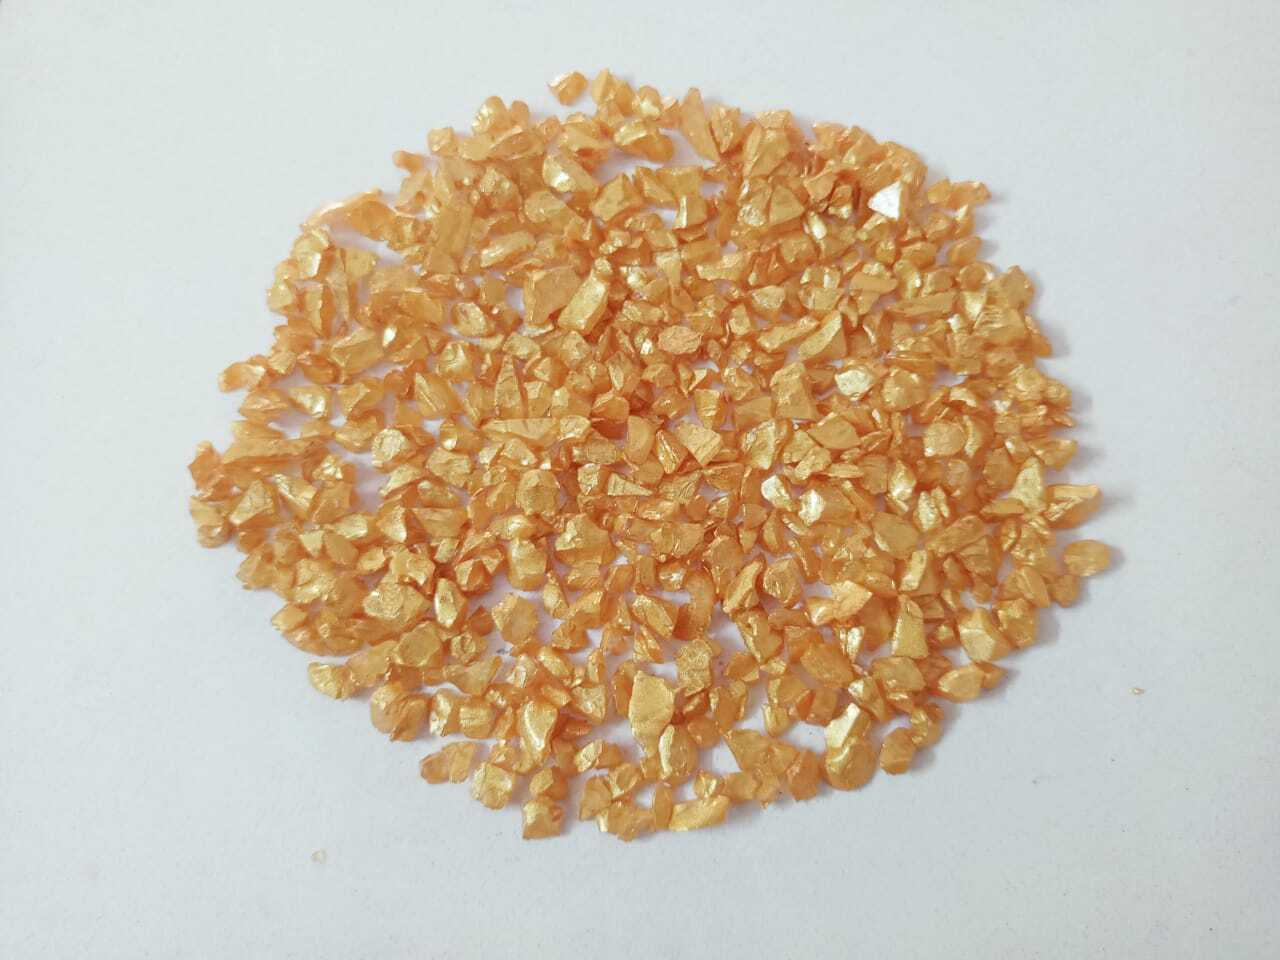 premium quality silver coated glass stone crushed chips